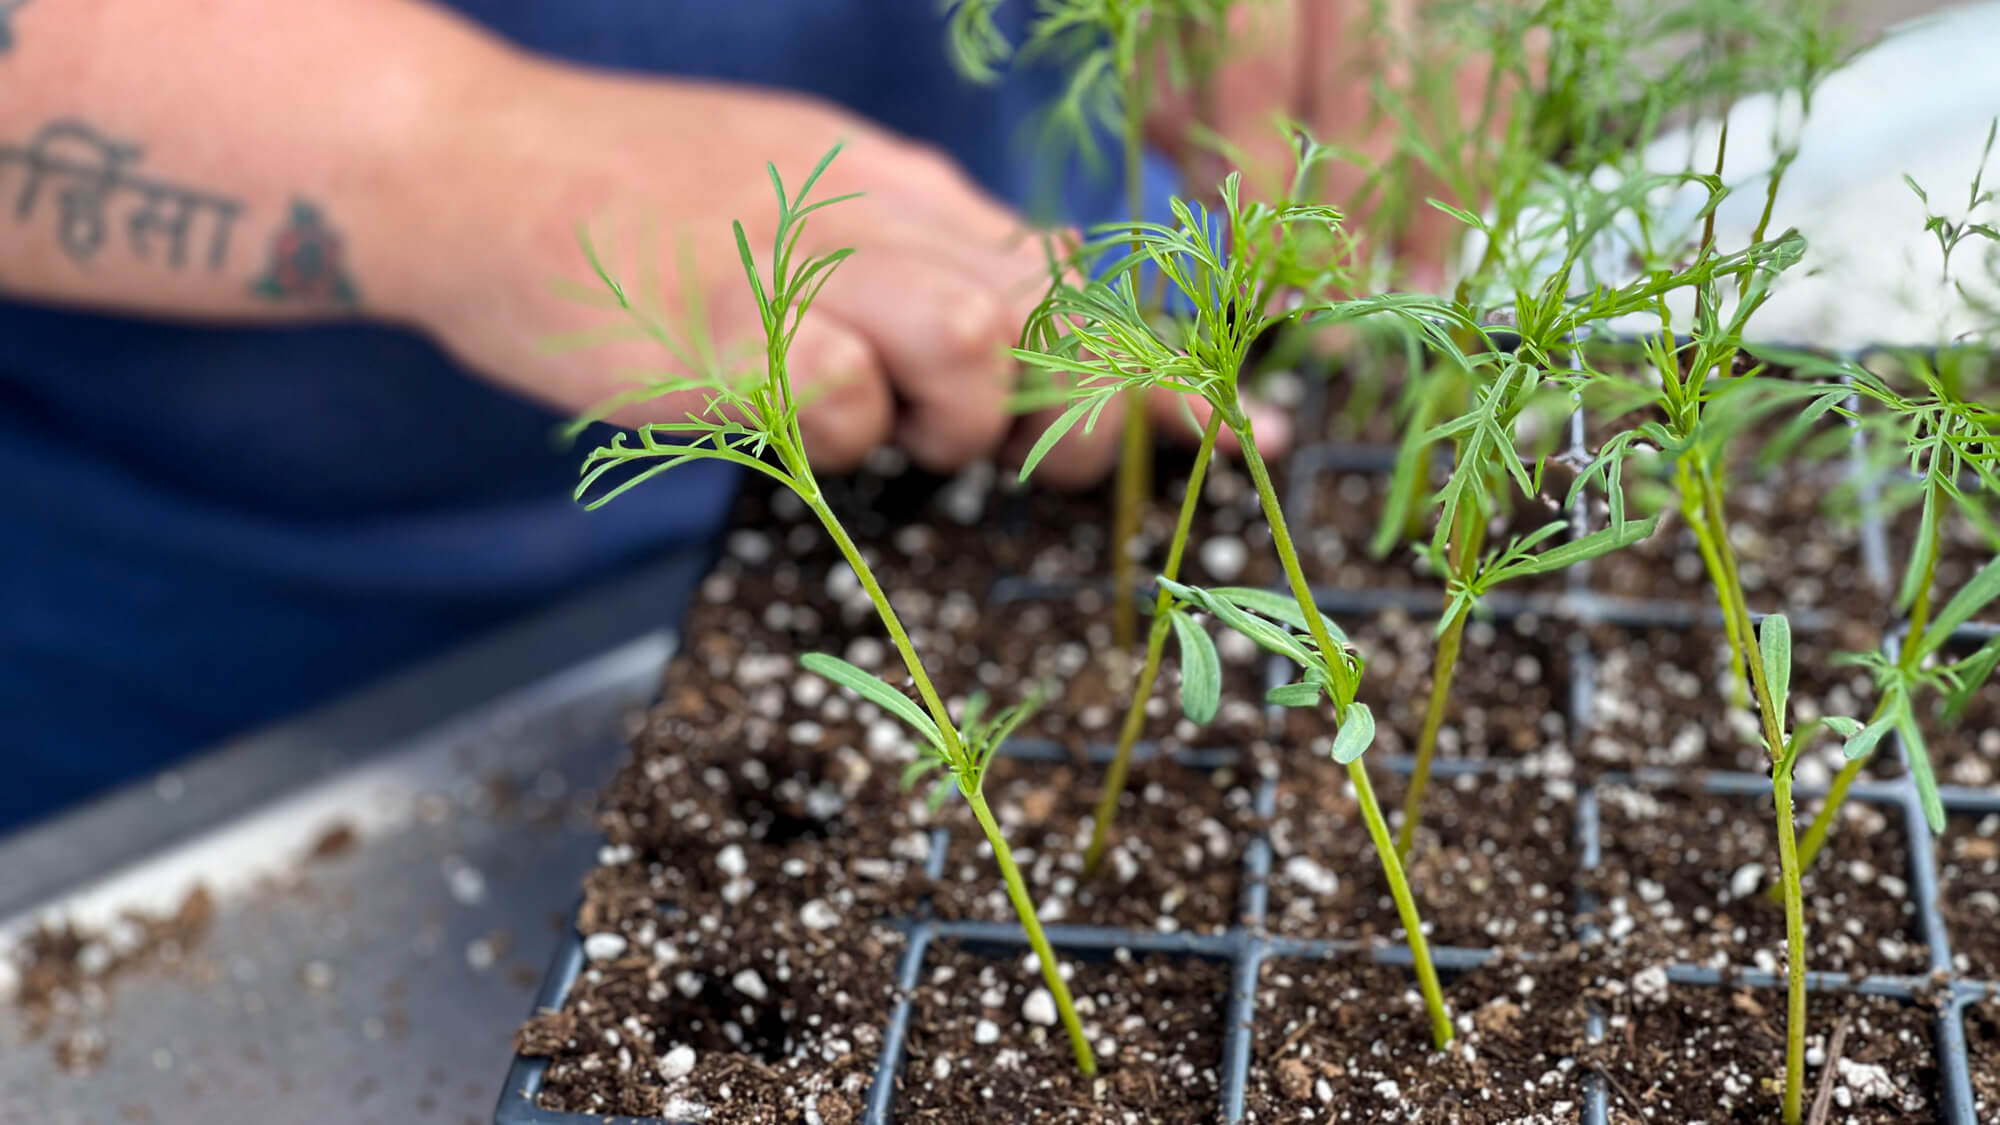 man transplanting small plants in a tray